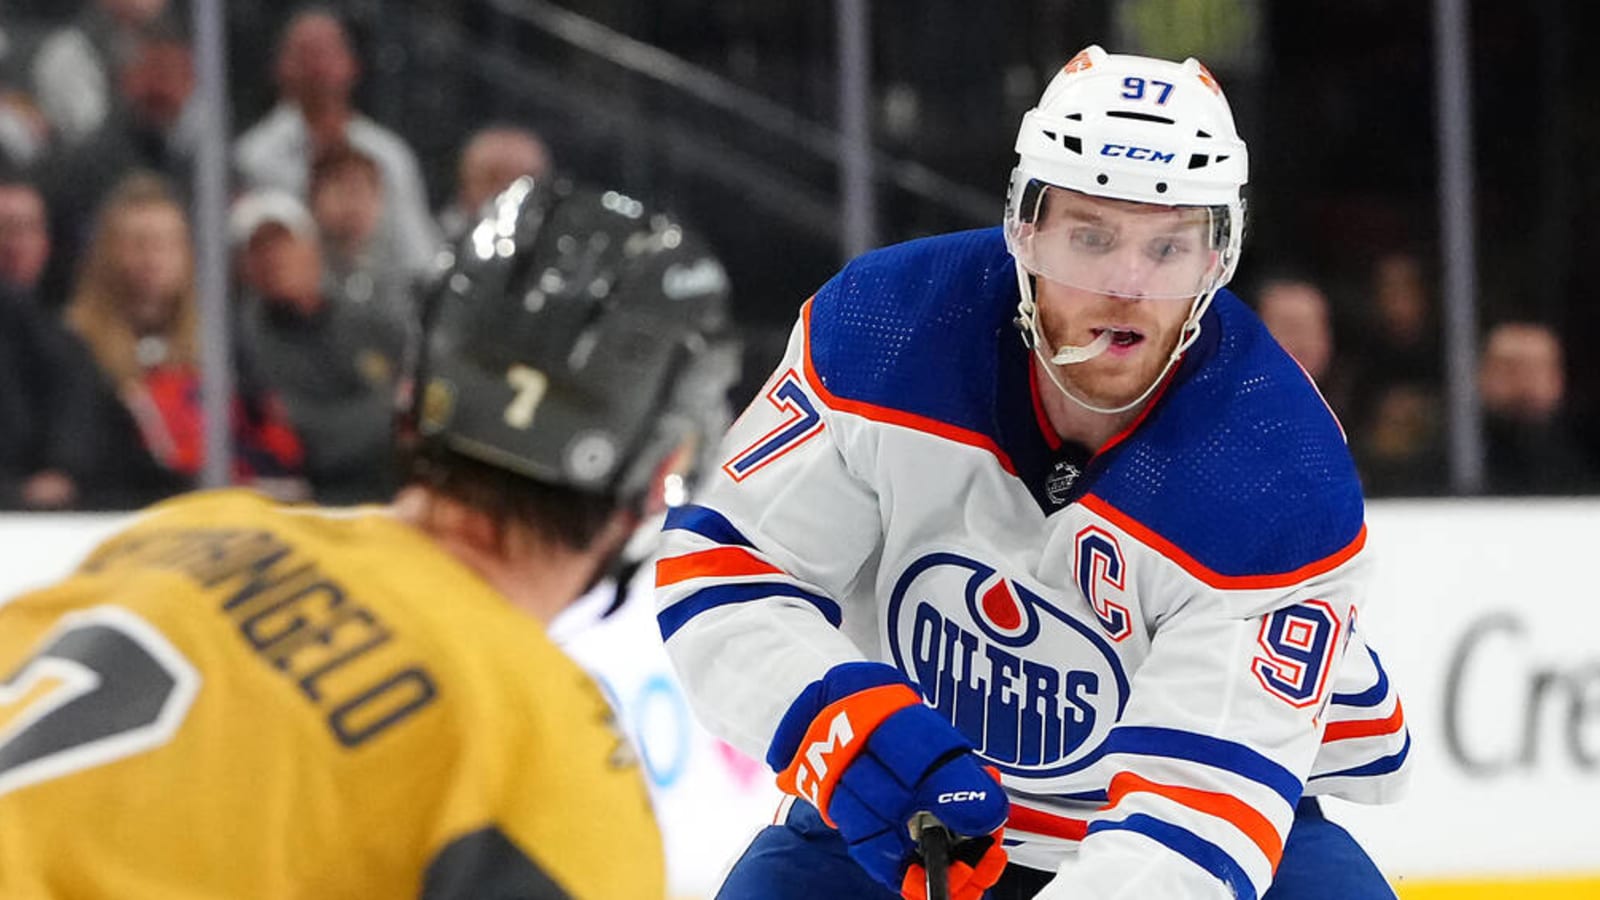 Oilers' winning streak ends one game short of NHL record